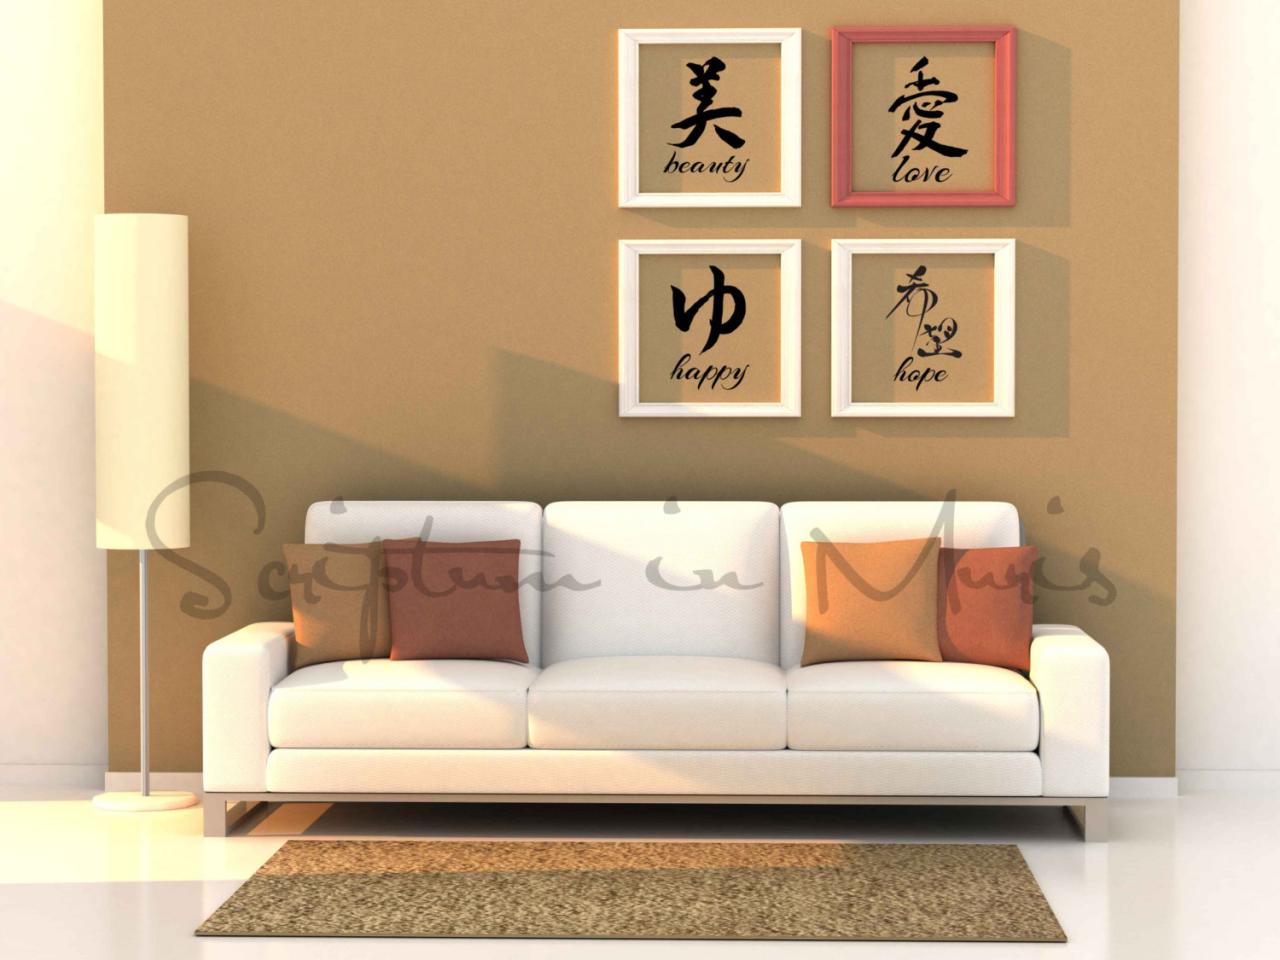 Chinese Words (beauty, Hope, Happy, Love)